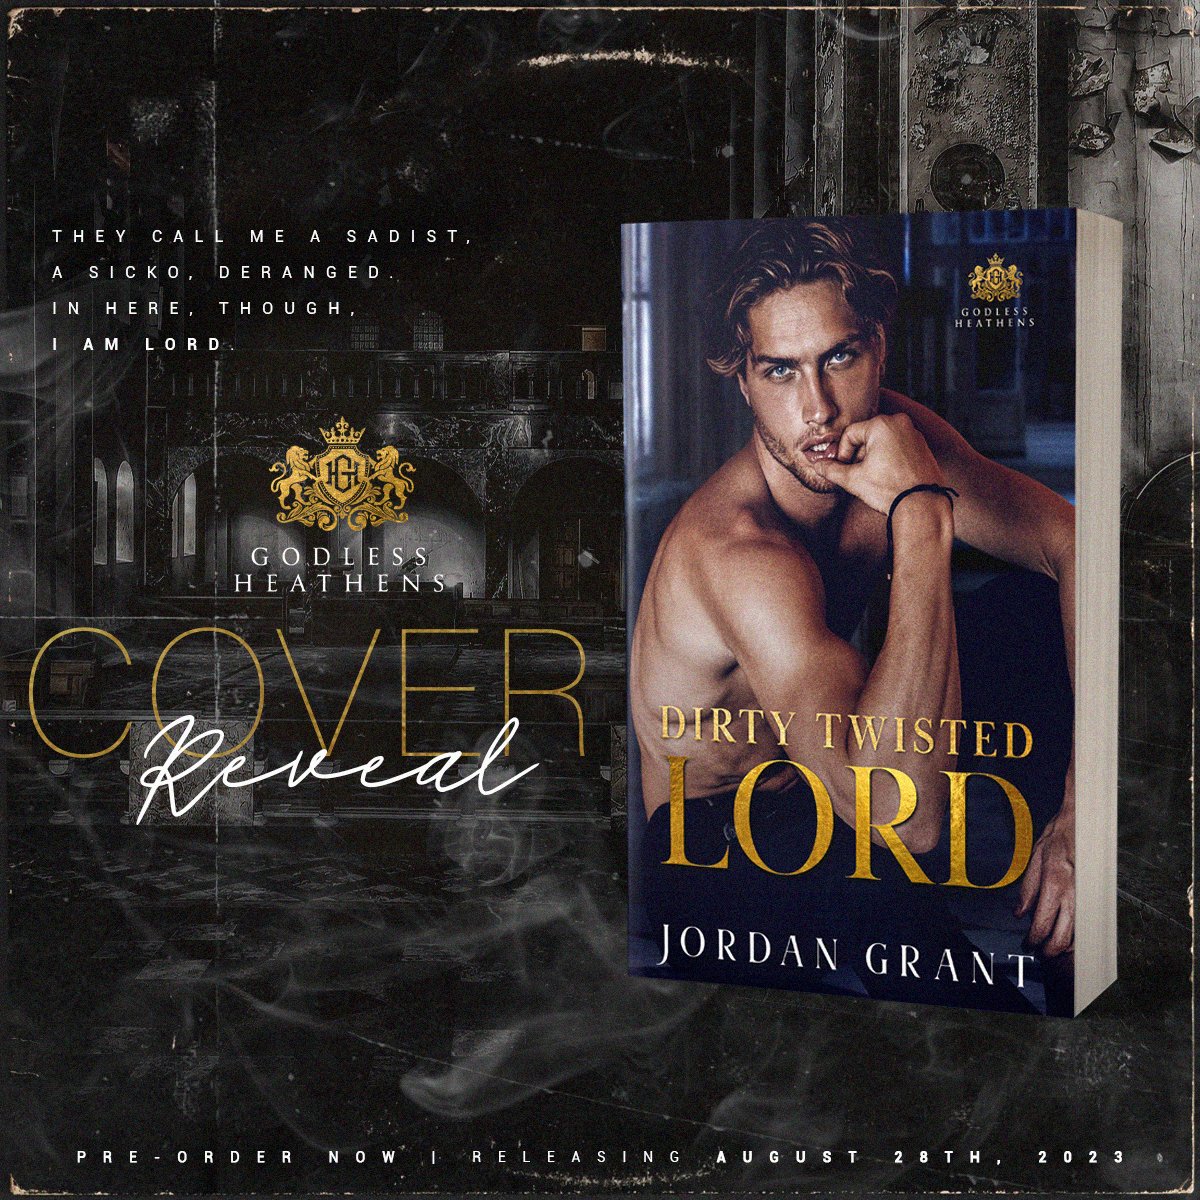 ✩ 🌟 HOT Cover Reveal 🌟 ✩
Dirty Twisted Lord by @authorjgrant is coming 09.14 #gothicromance #bullyromance #dirtytwistedlord #darkromance #godlessheathens #kindleunlimited #darkasylumromance #jordangrant #dsbookpromotions Hosted by
 @DS_Promotions1

 books2read.com/DirtyTwistedLo…